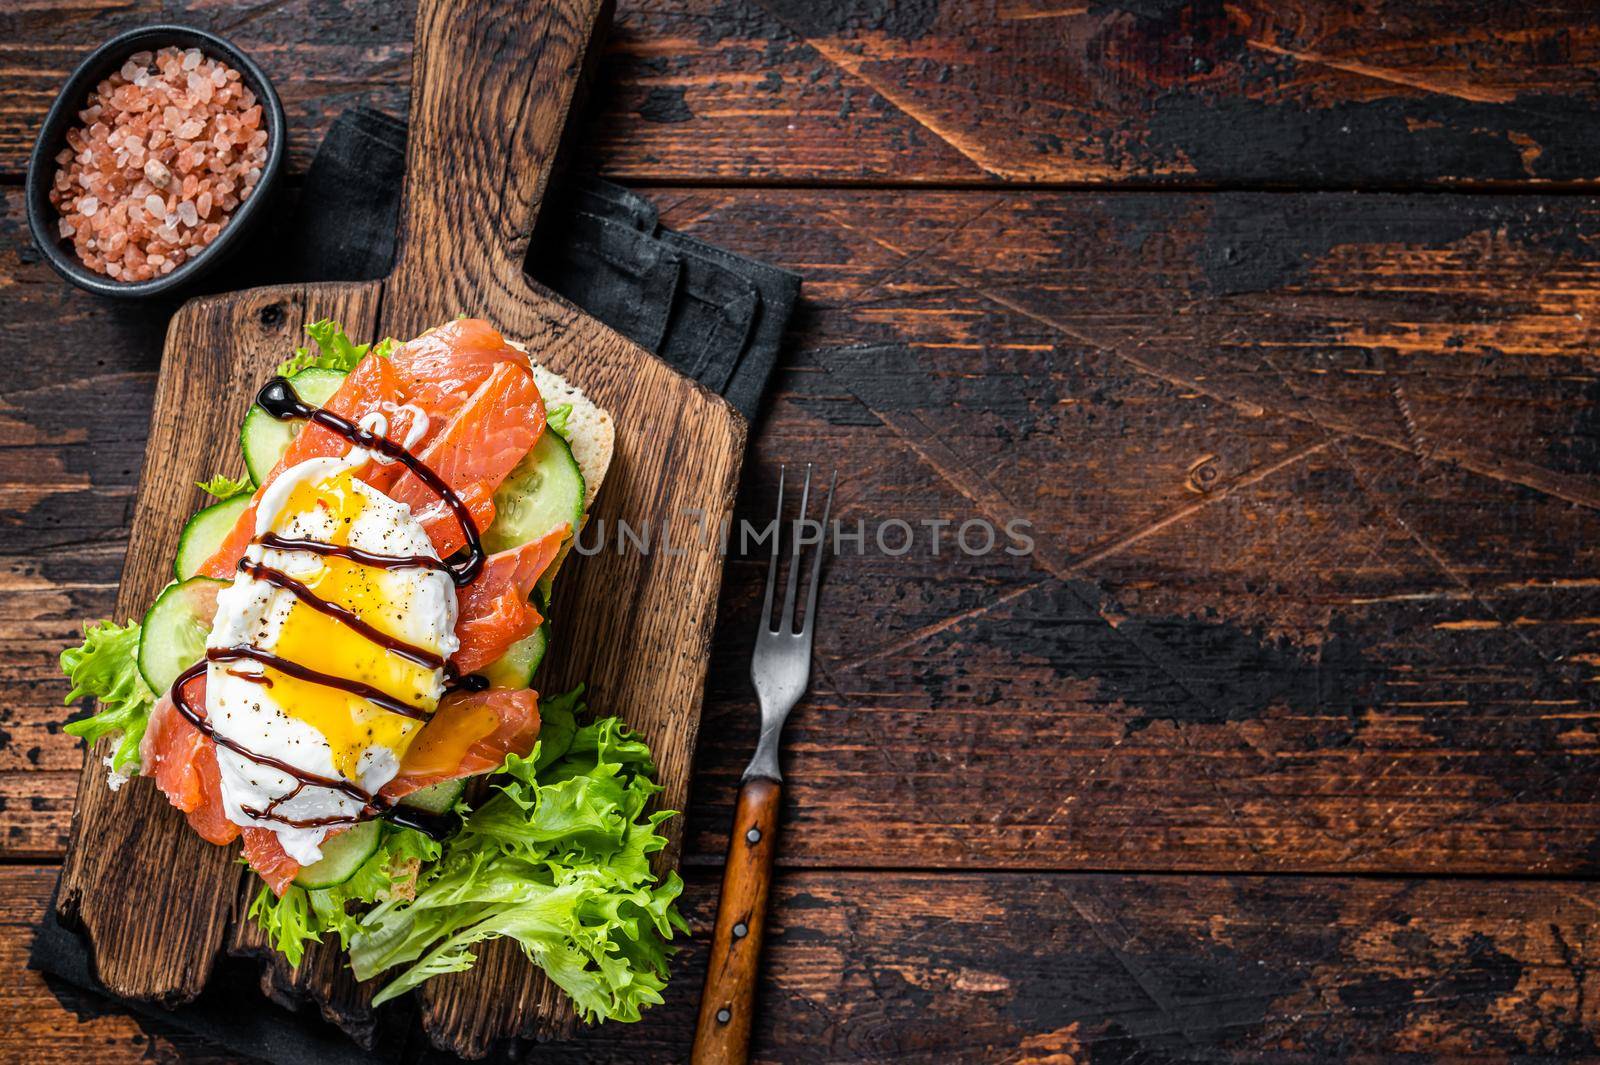 Smoked salmon Sandwich with Benedict egg and avocado on bread. Dark wooden background. Top view. Copy space by Composter